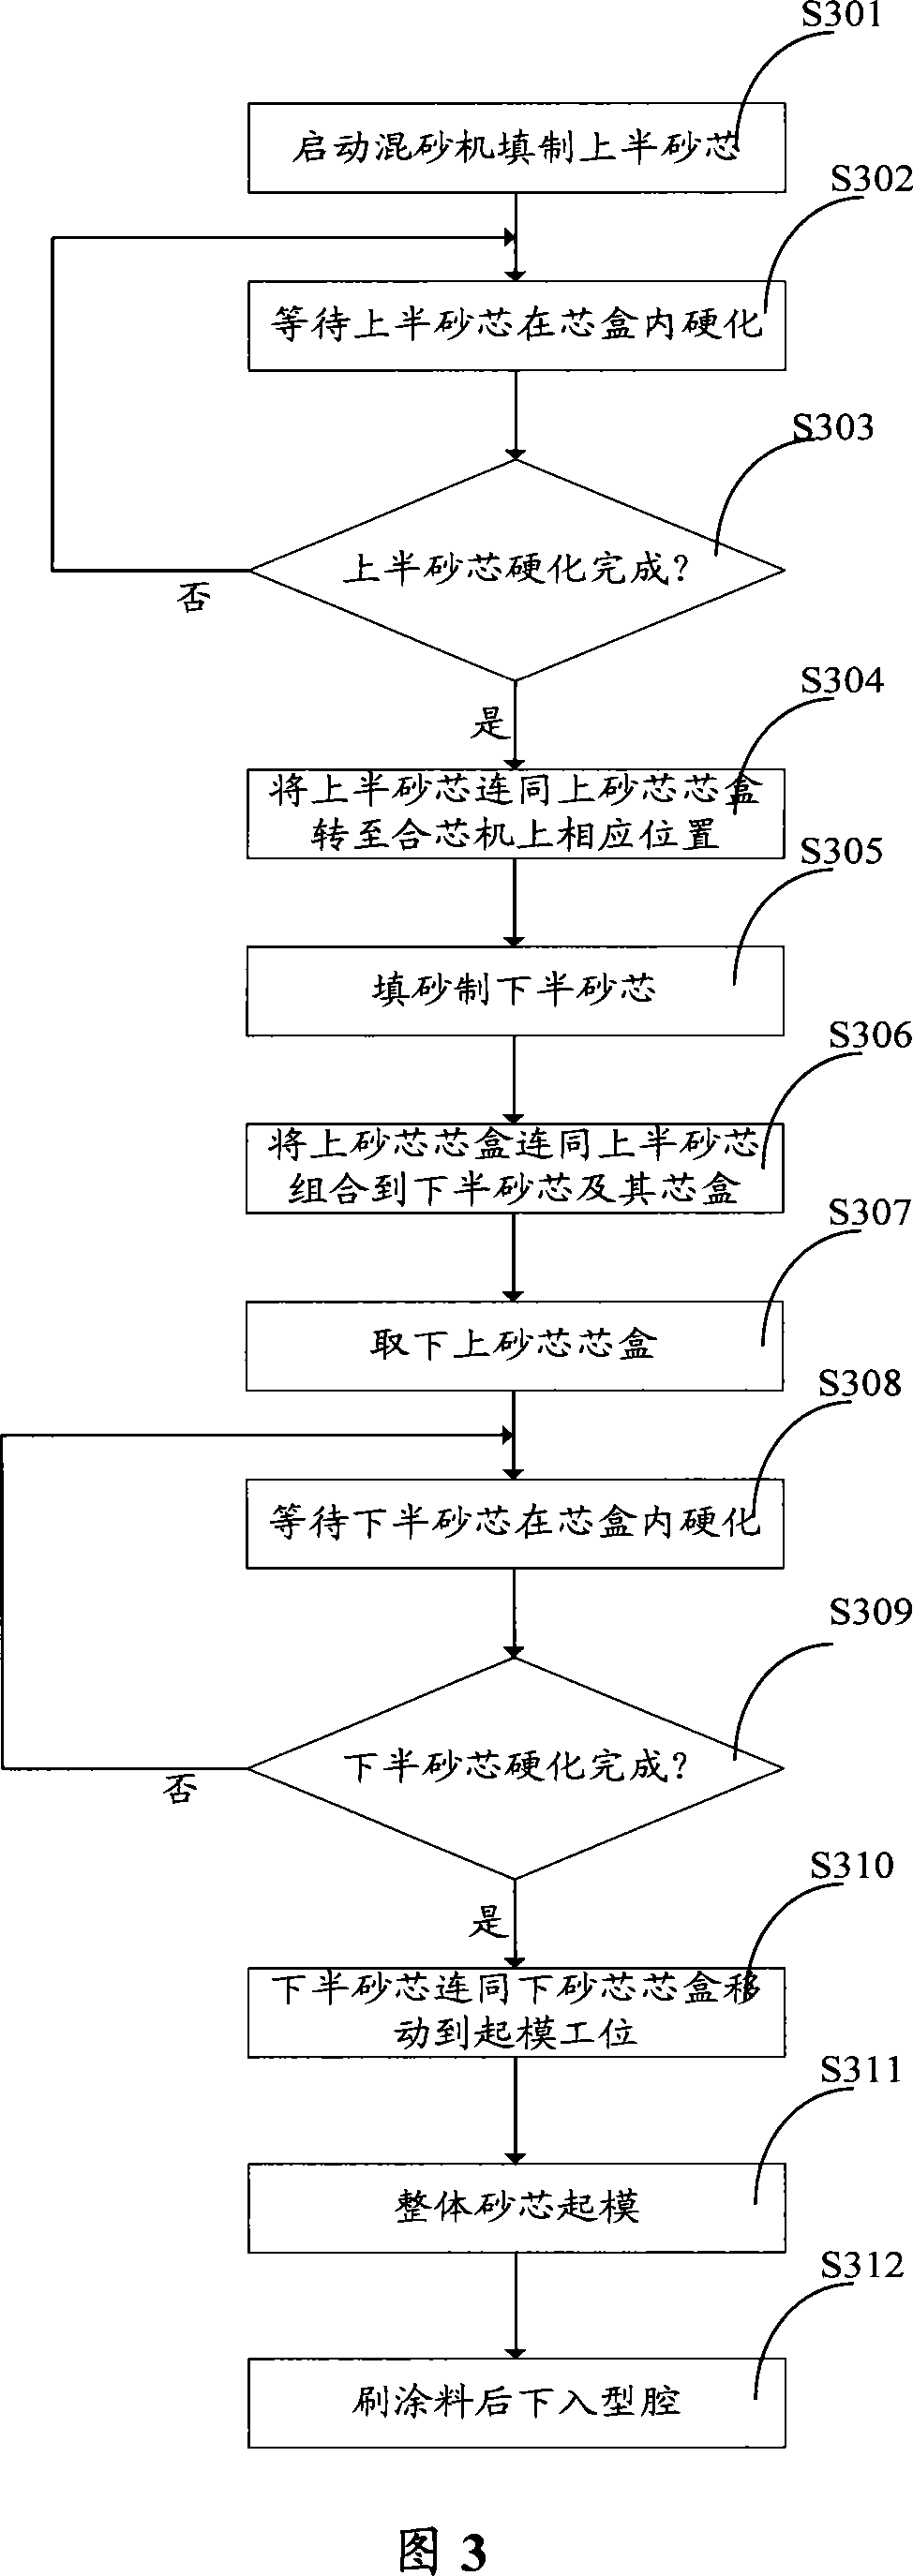 Bolster and side frame integral core producing method